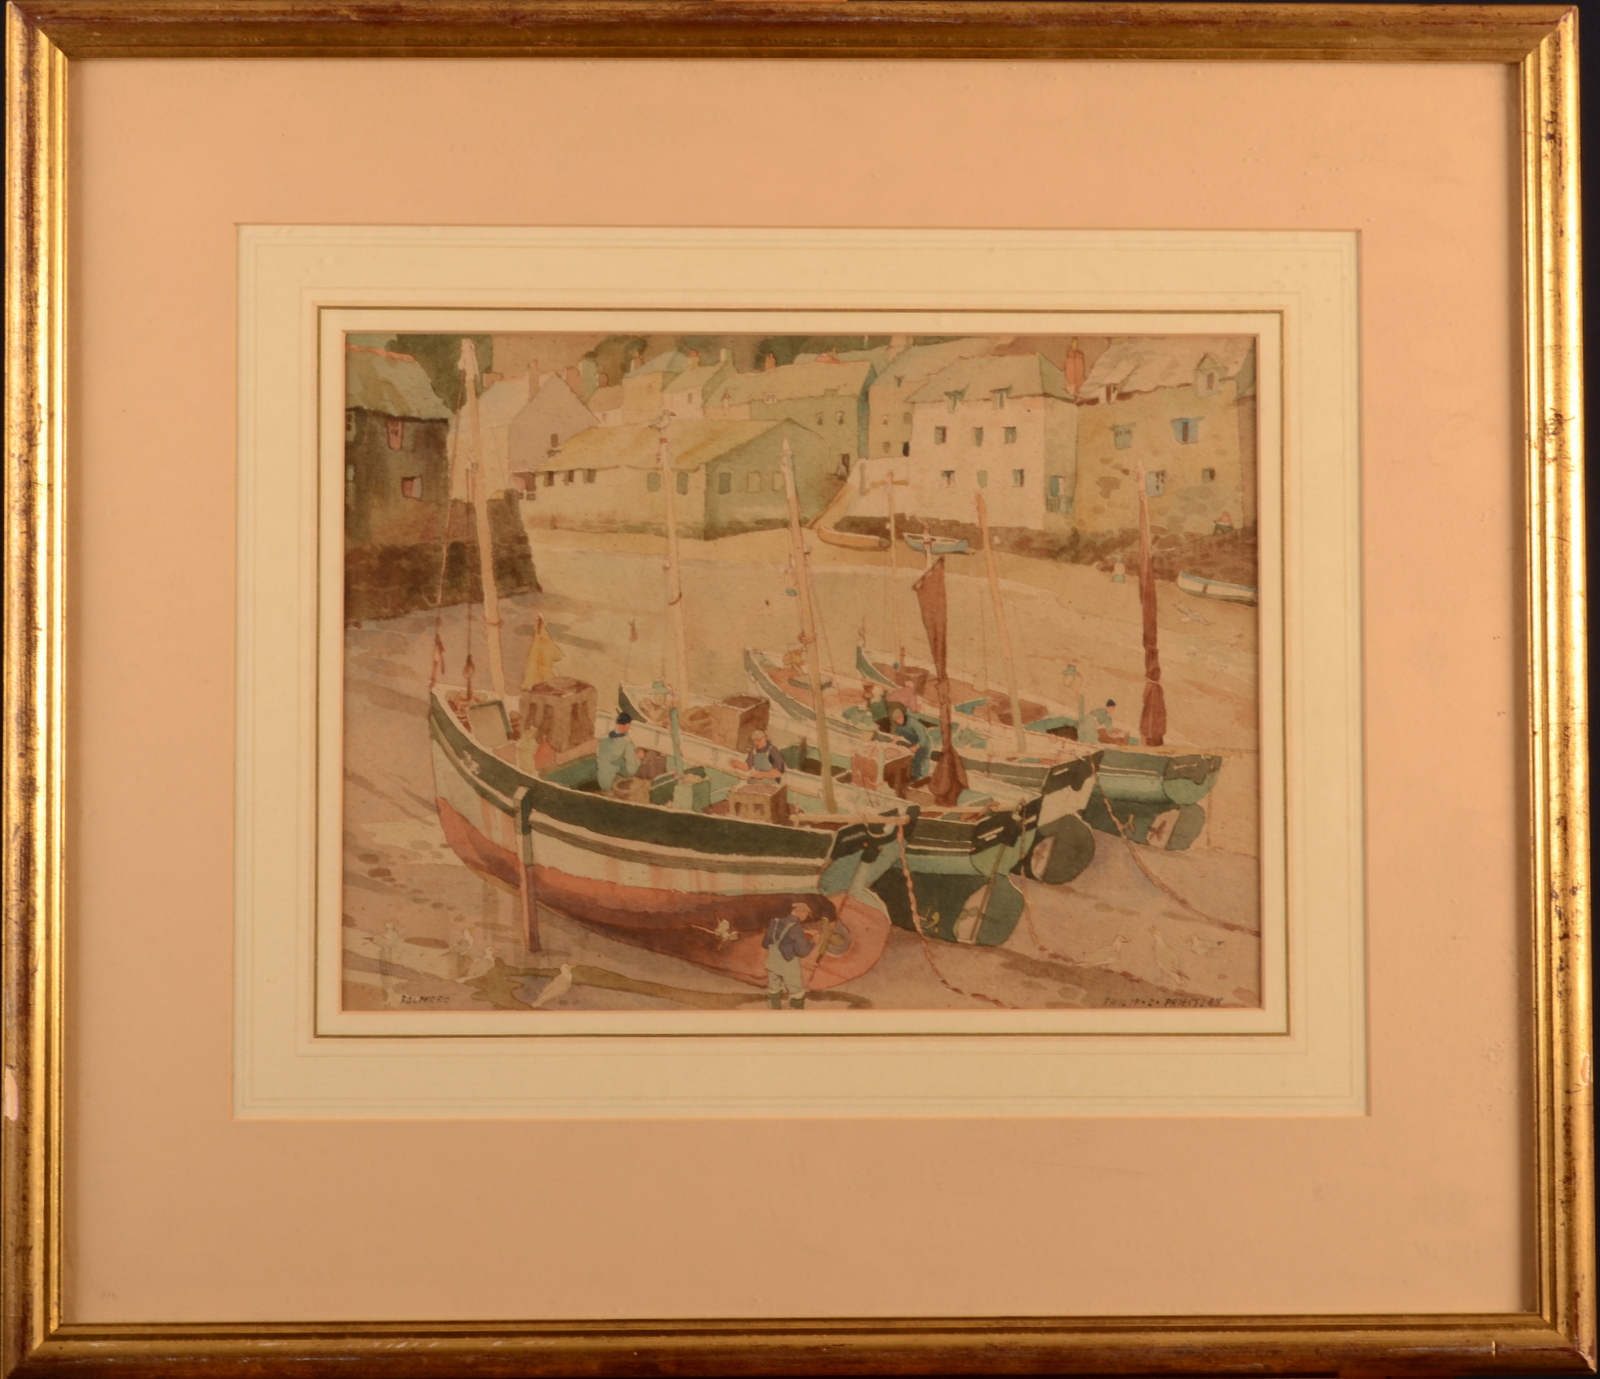 PHILIP COLINGWOOD PRIESTLEY Polperro Watercolour Signed and inscribed 28 x 38cm - Image 2 of 2